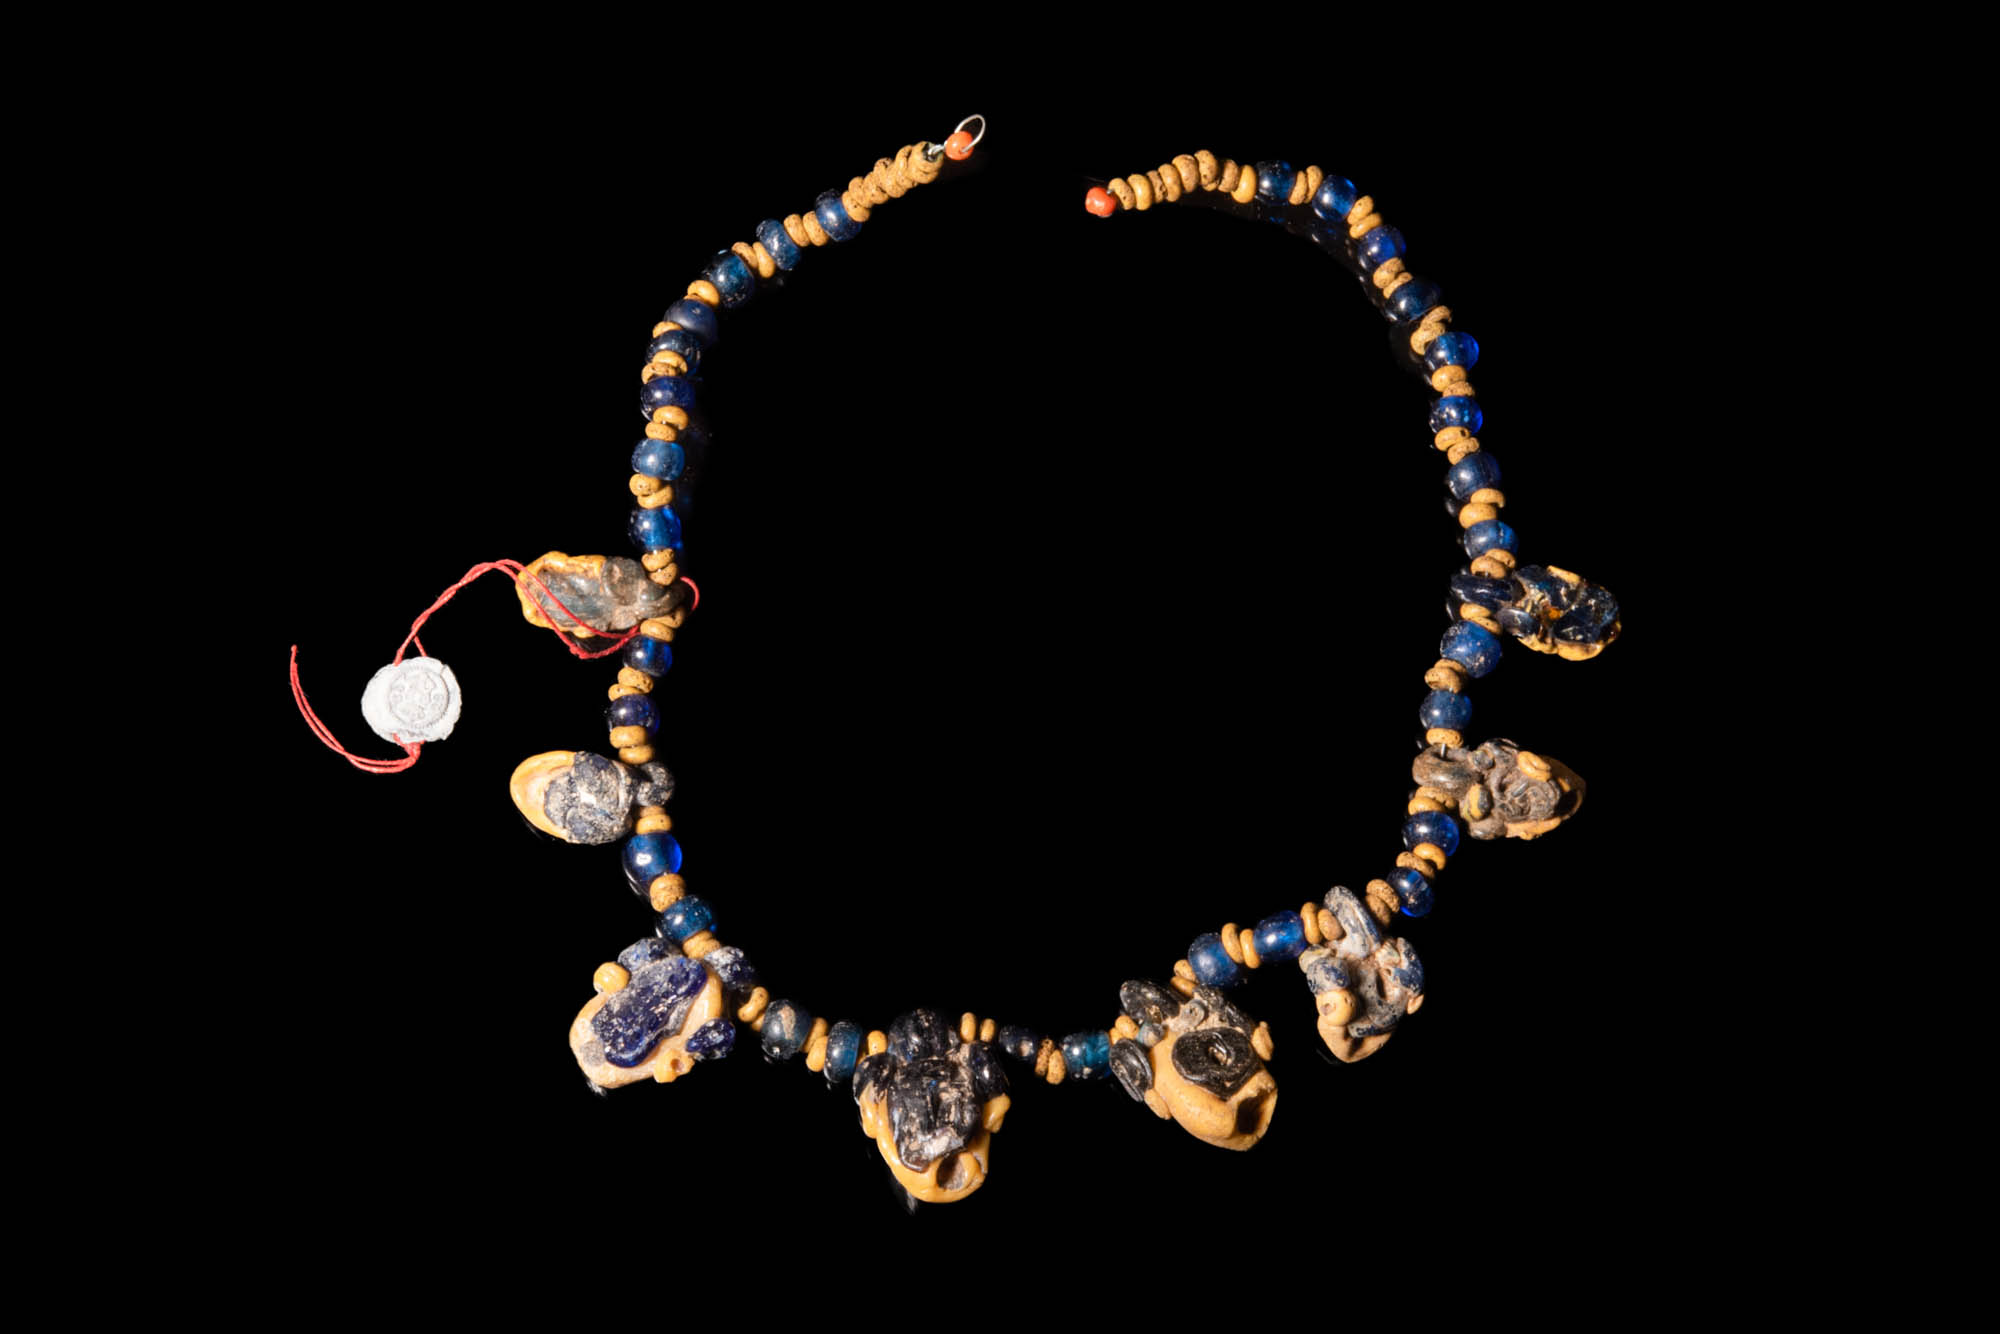 PHOENICIAN GLASS BEADED NECKLACE - Image 3 of 3